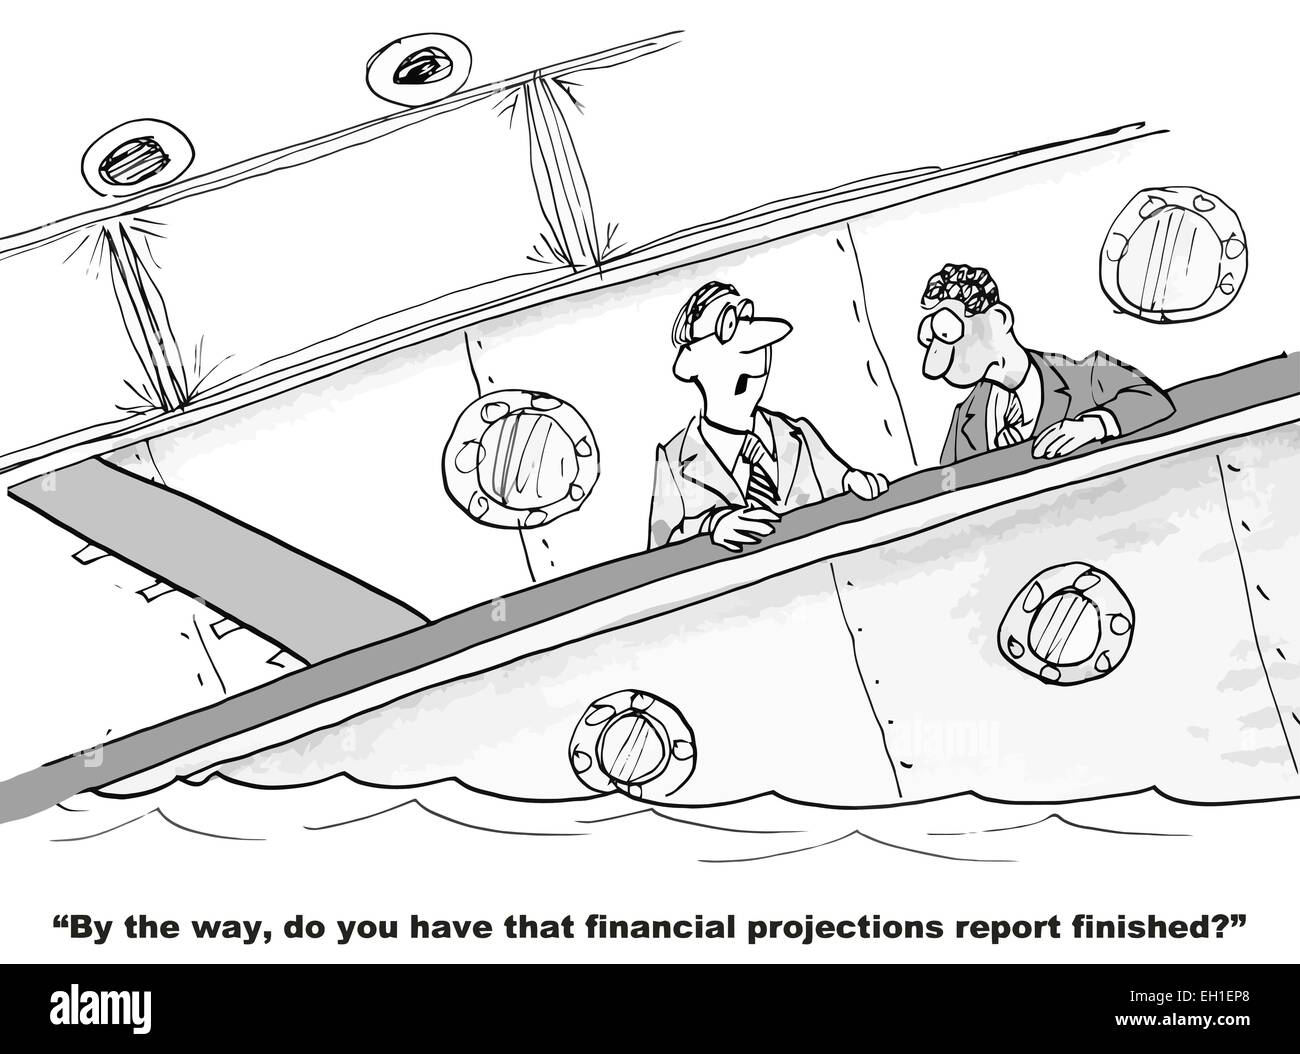 Cartoon Of Sinking Ship Business Boss Asks Do You Have